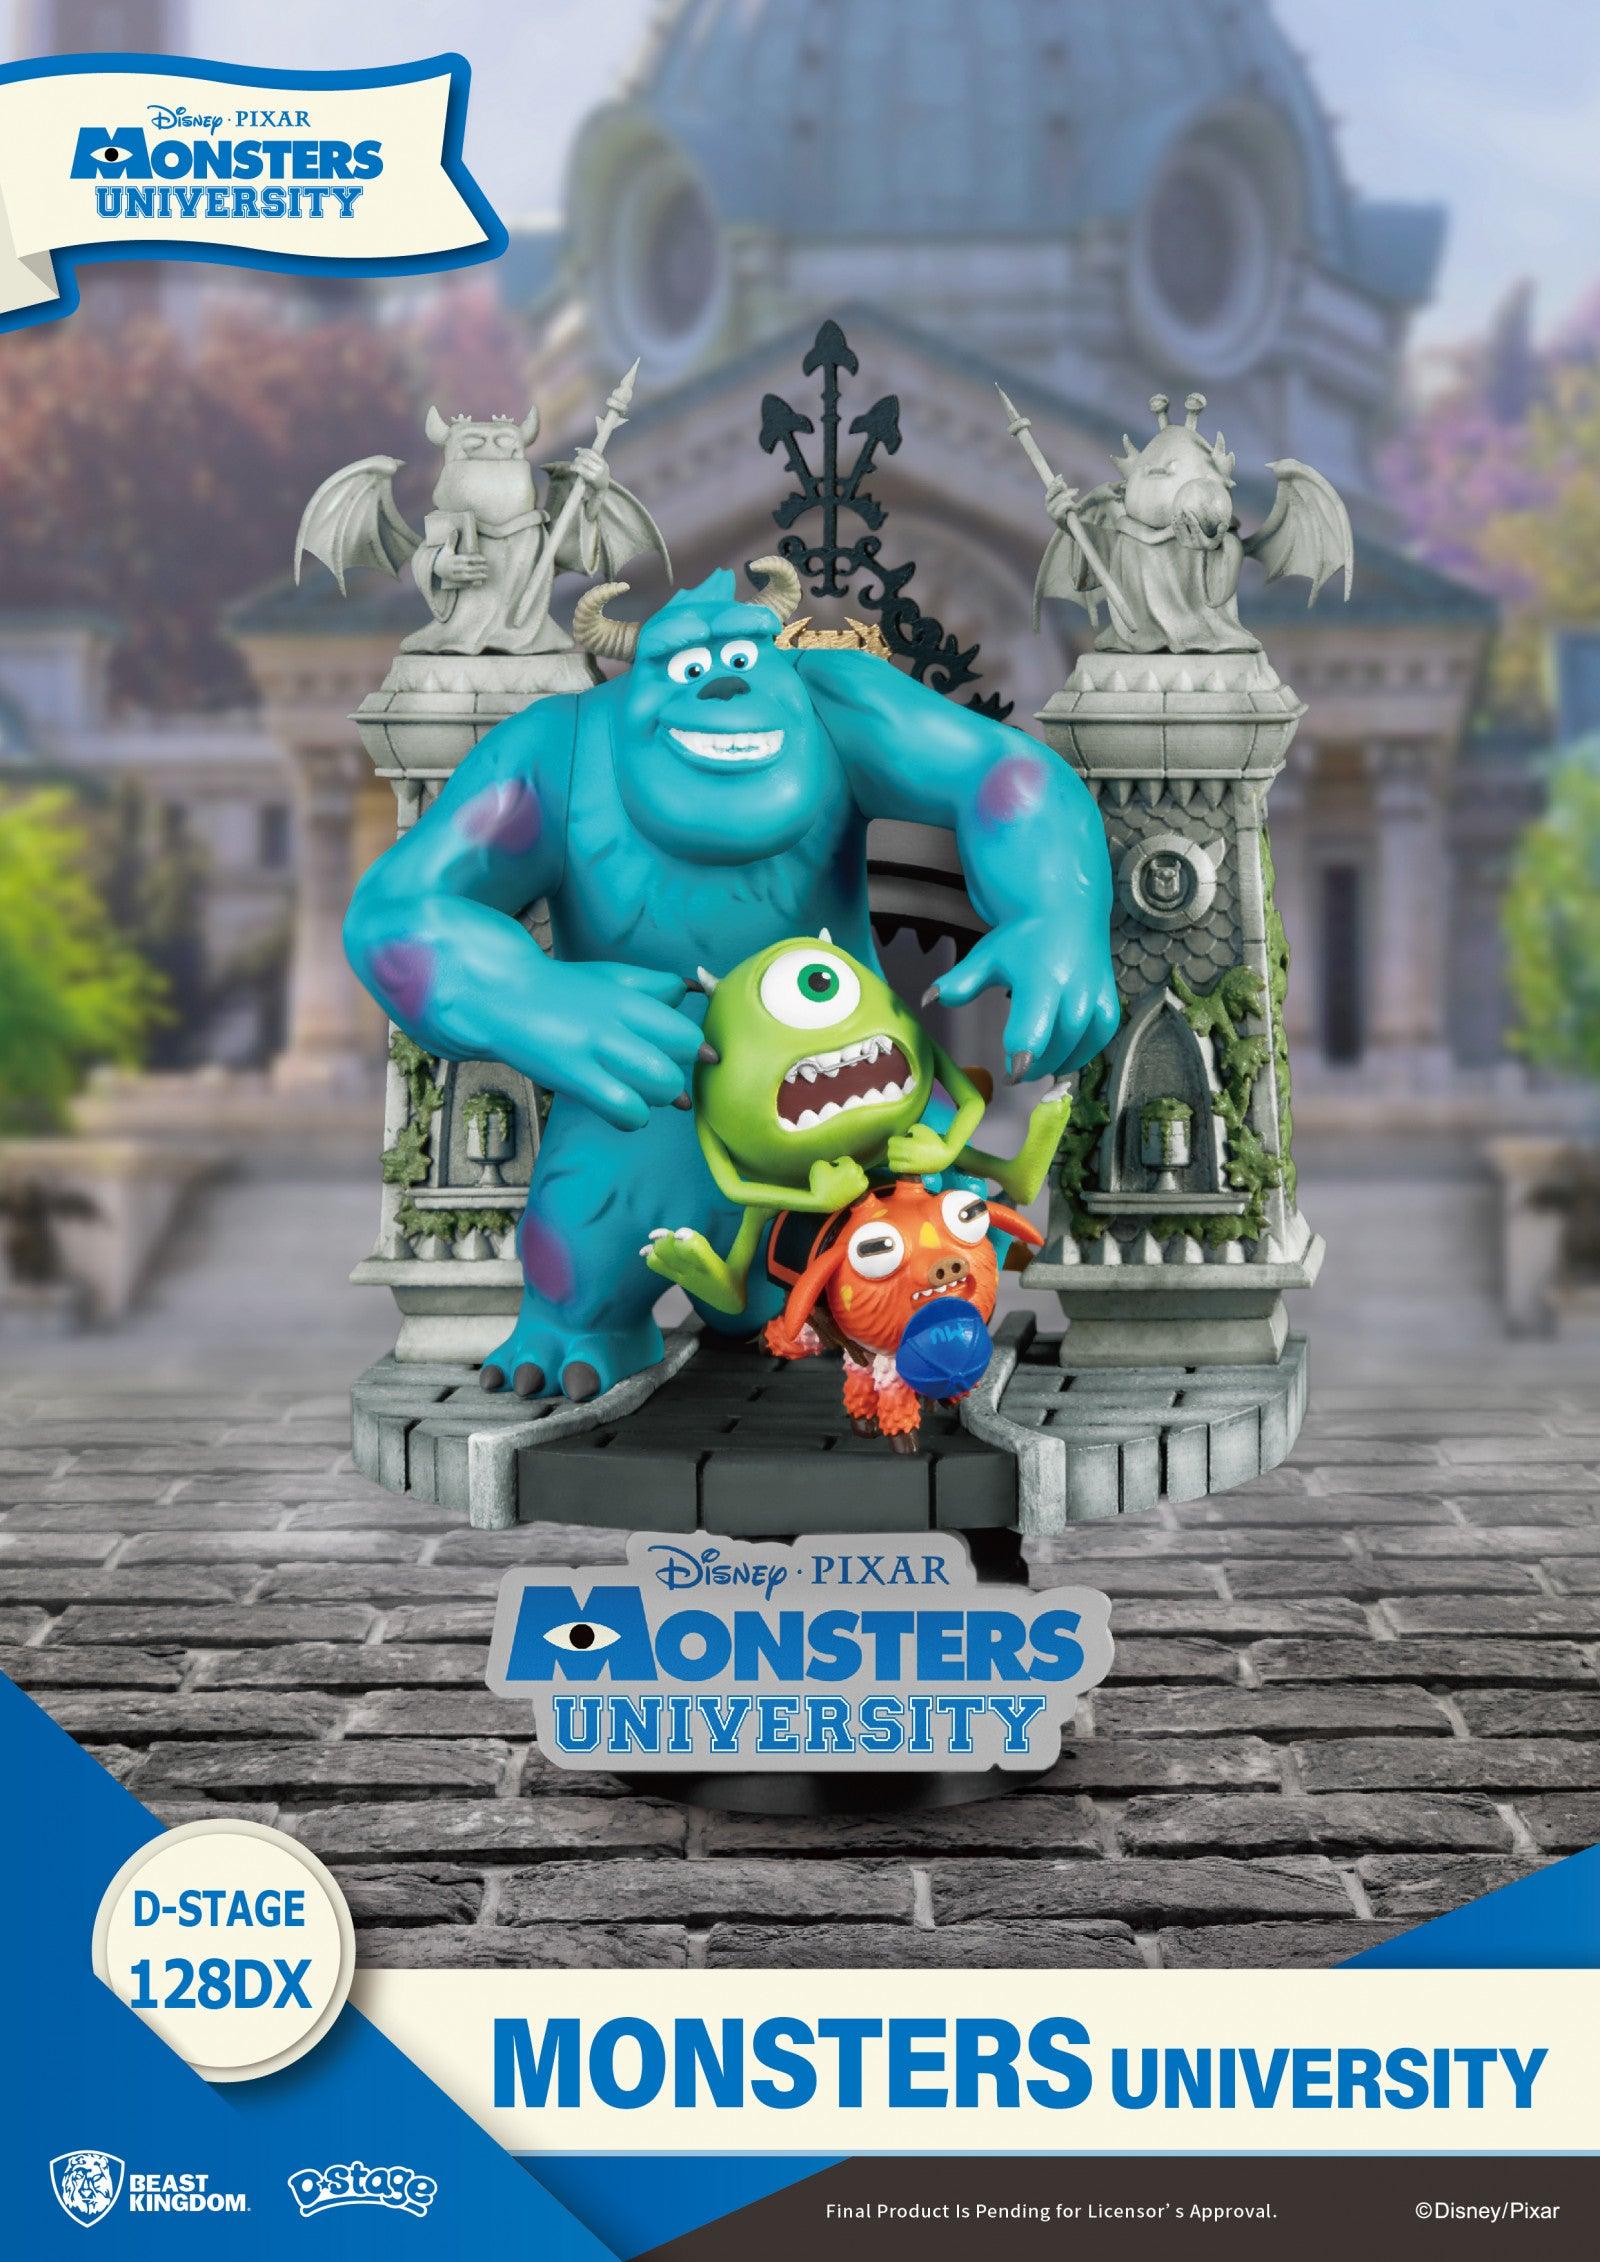 VR-101425 Beast Kingdom D Stage Monsters University Mike and Sulley - Beast Kingdom - Titan Pop Culture